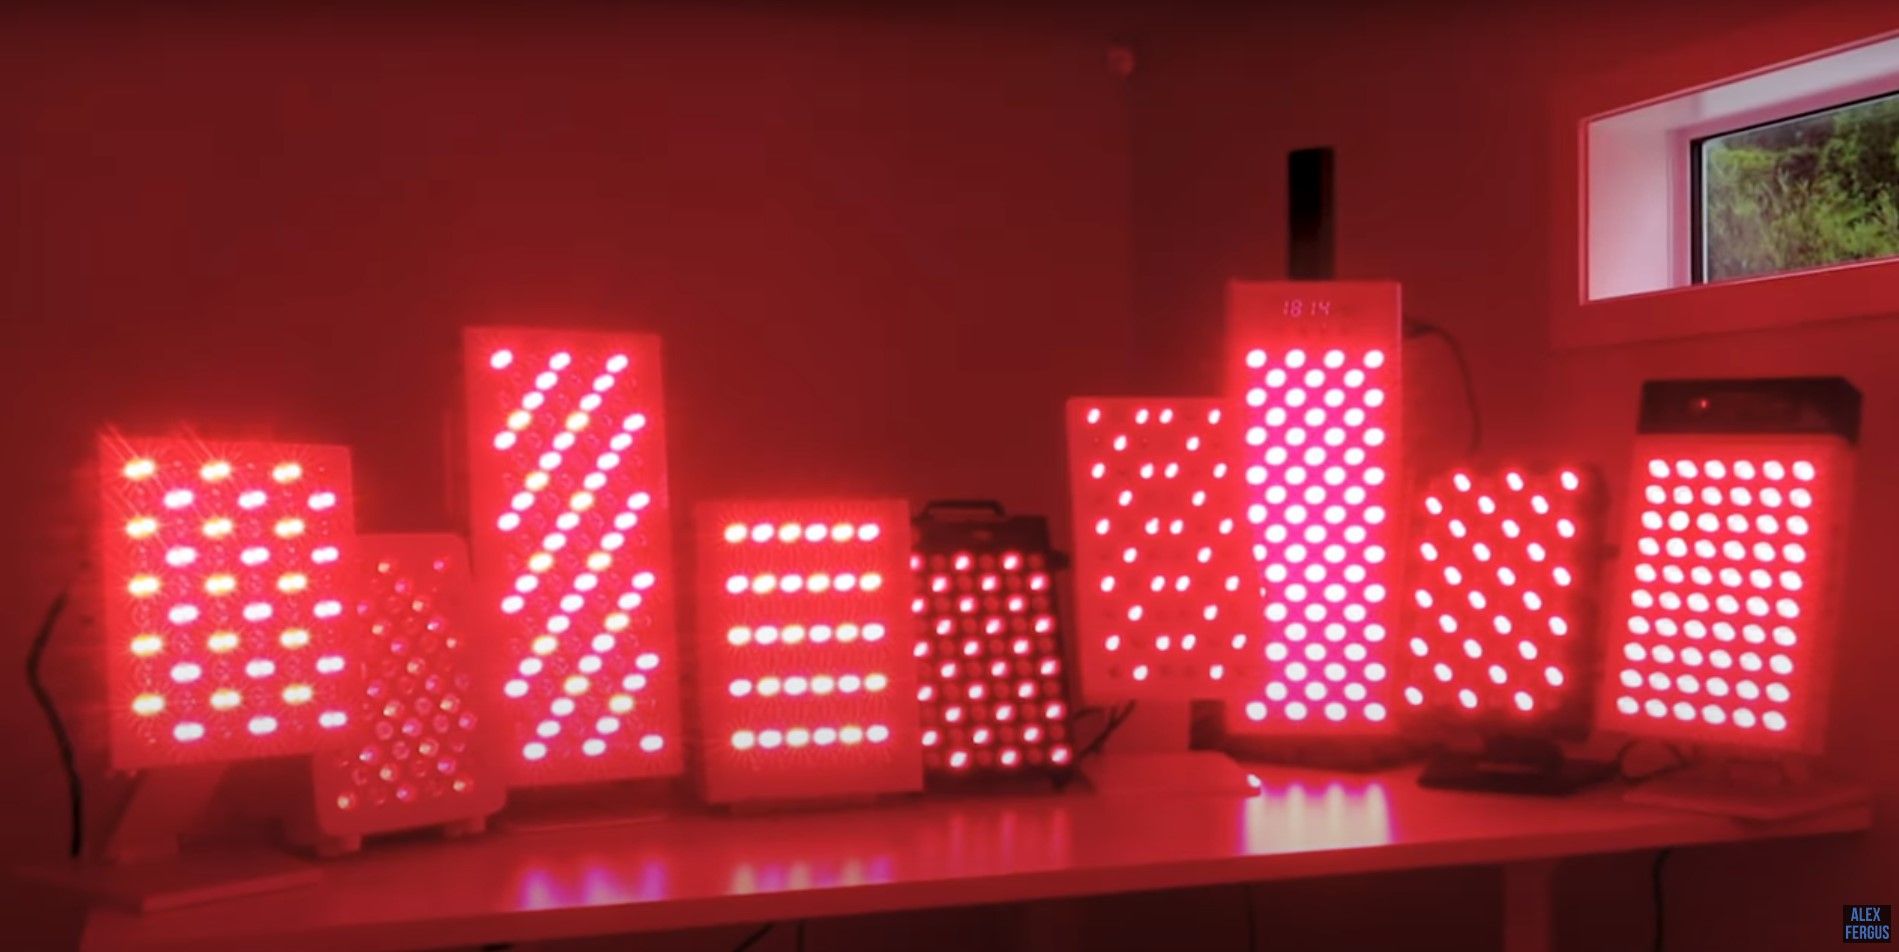 A lineup of many different tabletop red light therapy panels